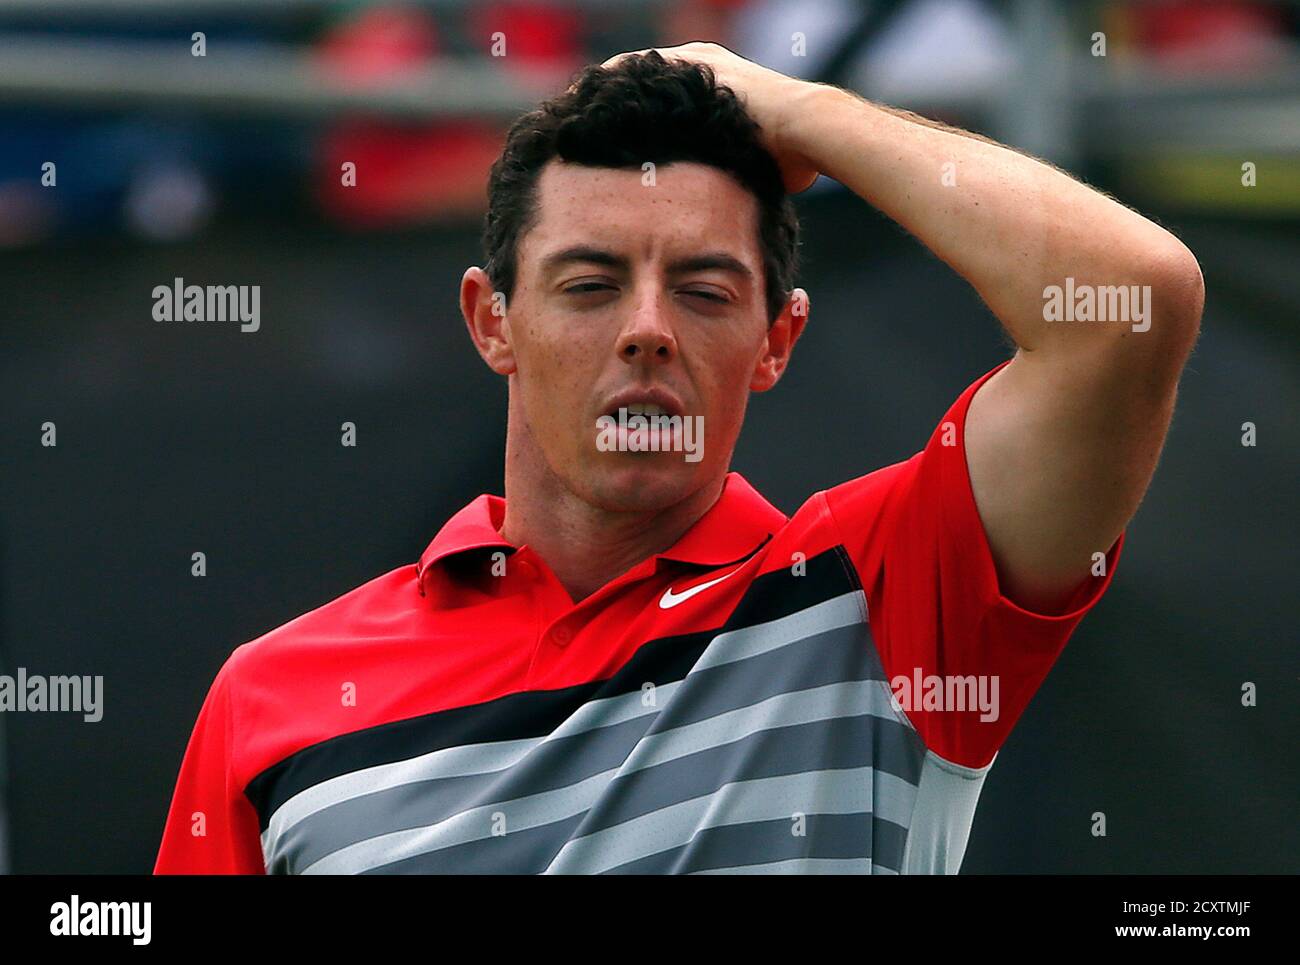 World number one and defending champion Rory McIlroy of Northern Ireland reacts after finishing his fourth and final round of the Australian Open golf tournament at The Australian Golf Club in Sydney November 30, 2014.    REUTERS/David Gray      (AUSTRALIA - Tags: SPORT GOLF) Stock Photo